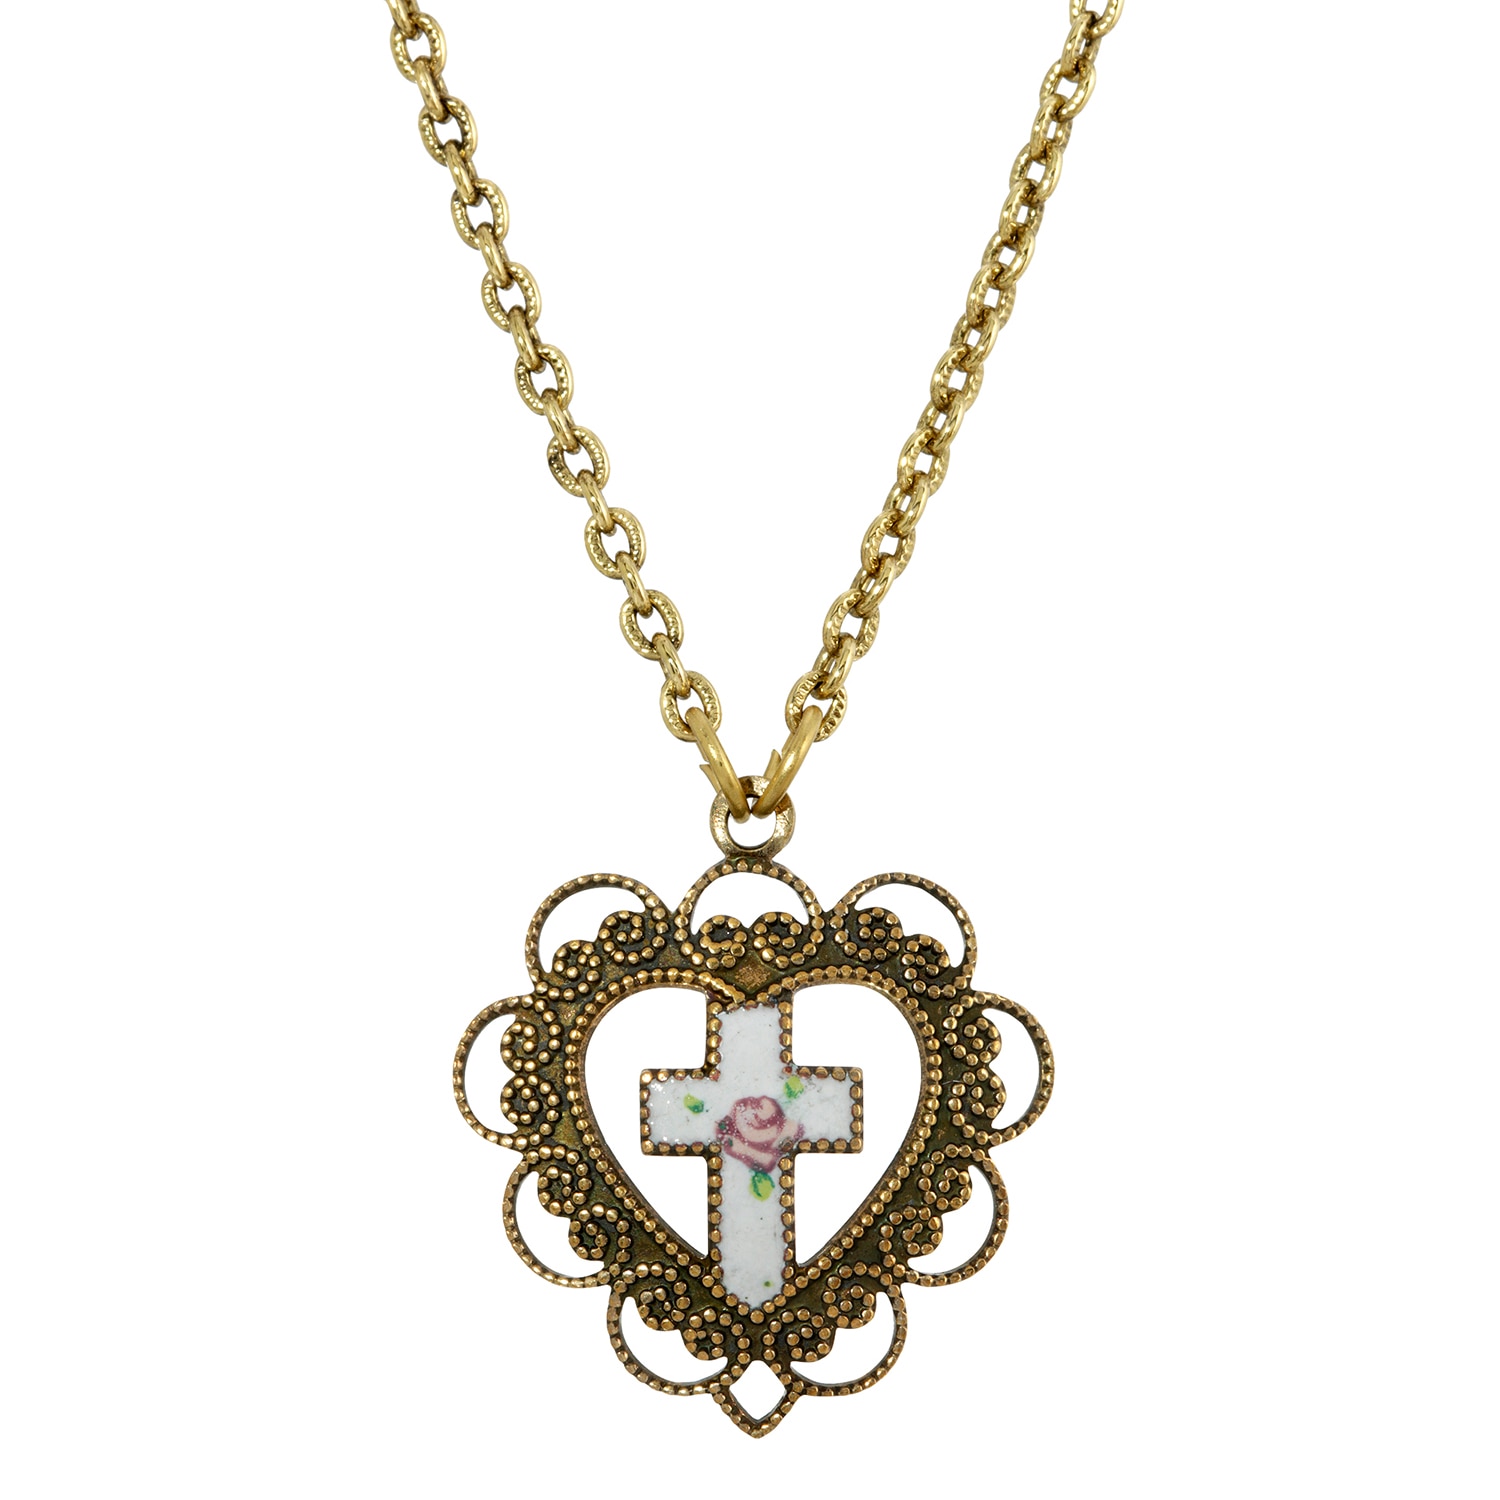 1928 Symbols of Faith hear with white floral cross necklace 16-19 inch adjustable chain